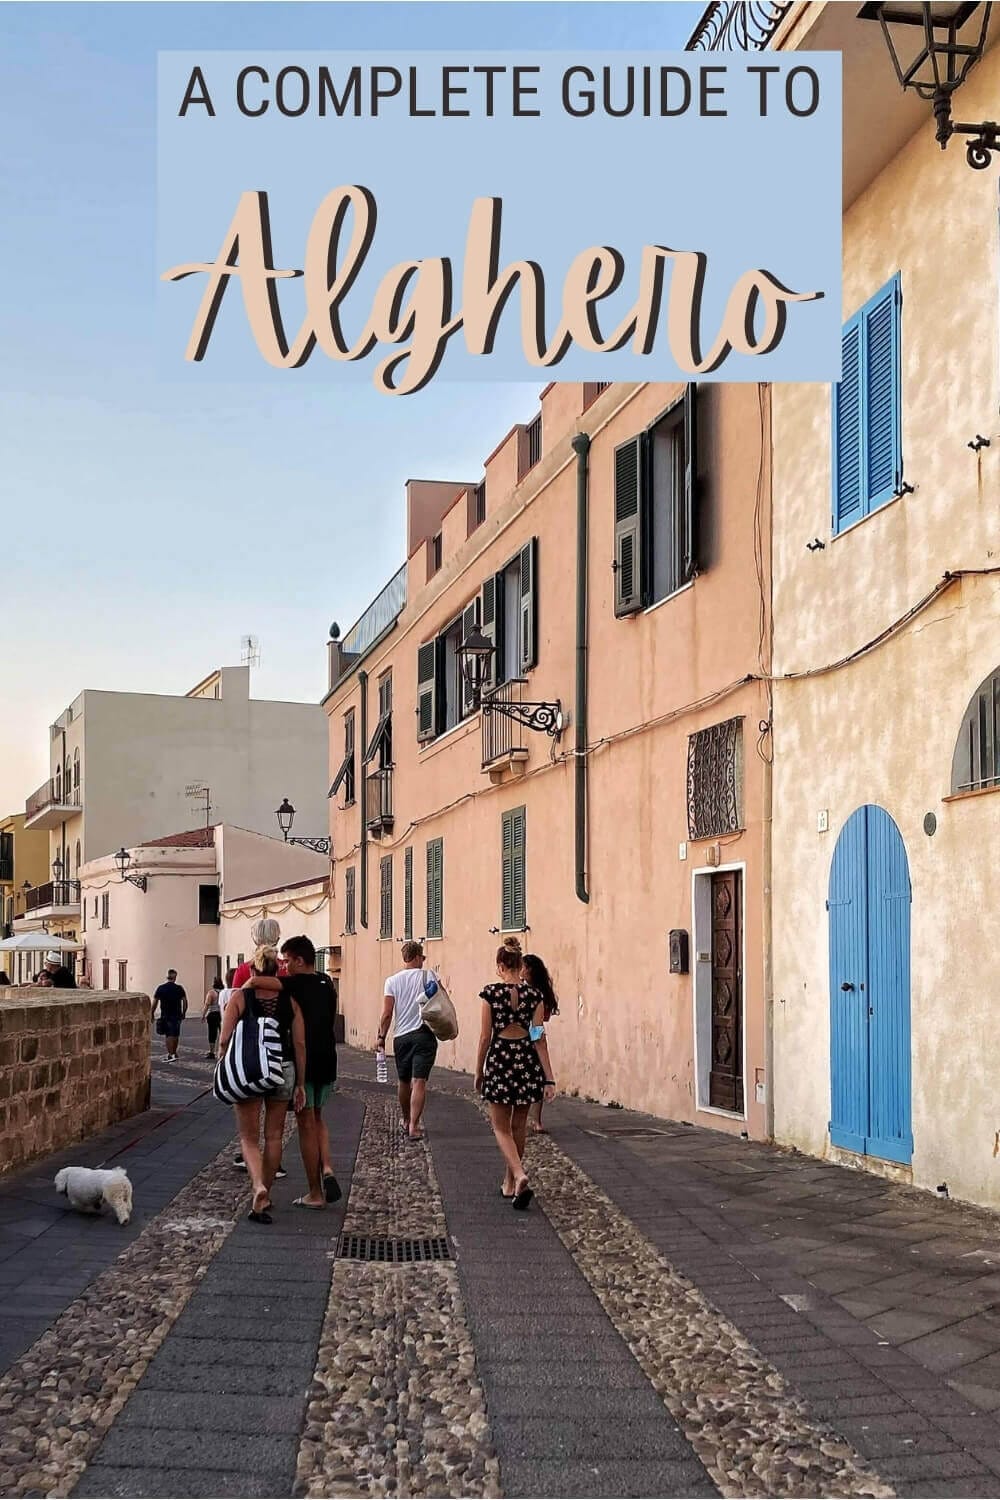 Read about the things to see and do in Alghero, Sardinia - via @clautavani